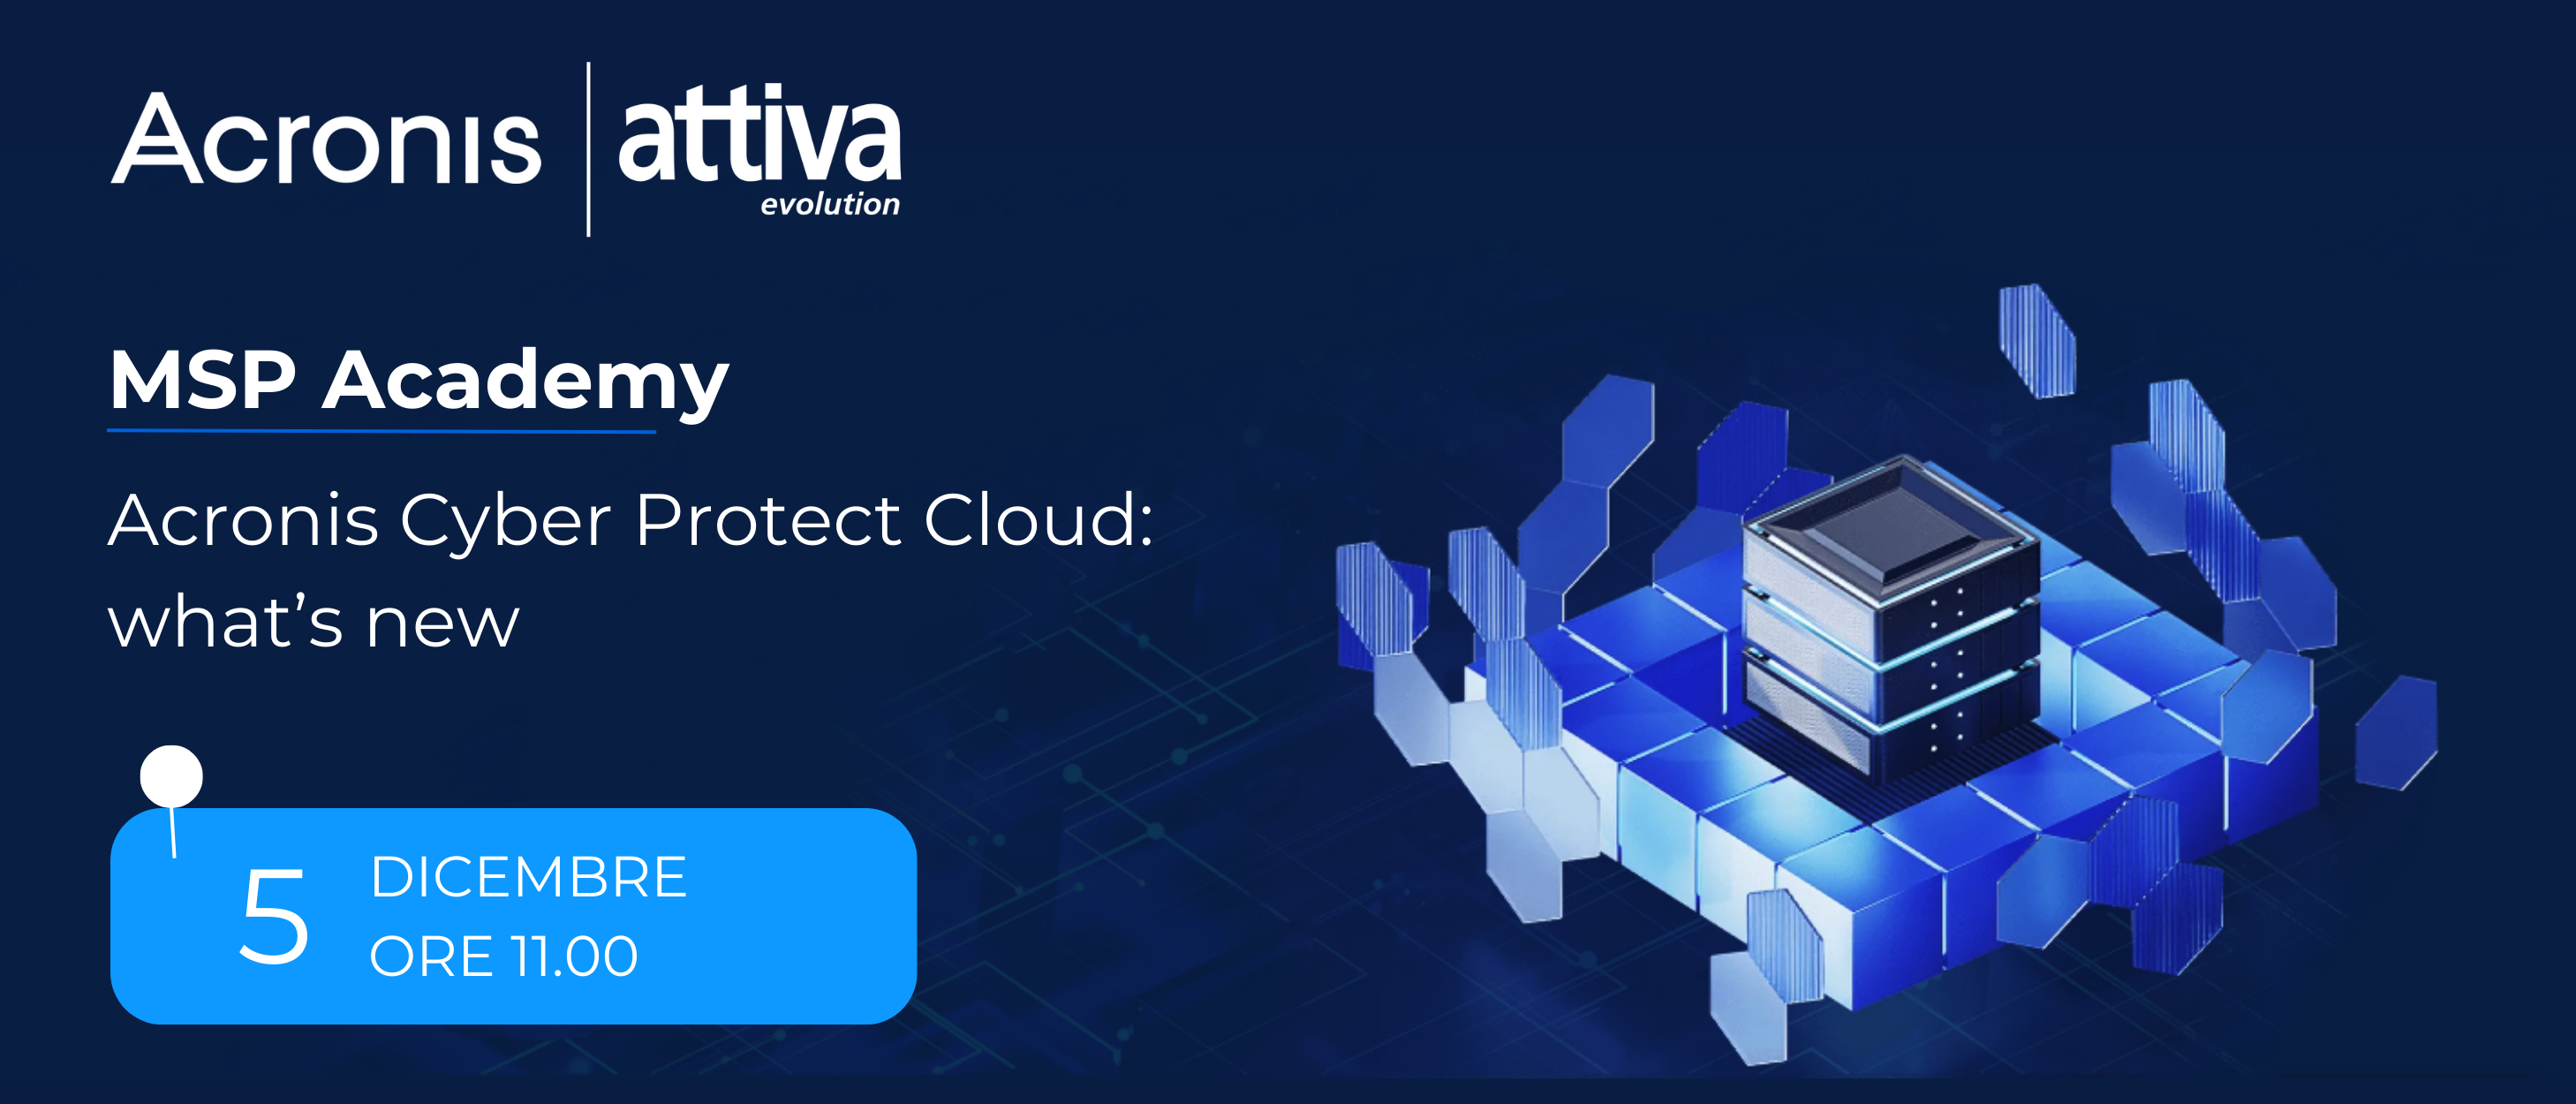 Acronis Cyber Protect Cloud: what’s new